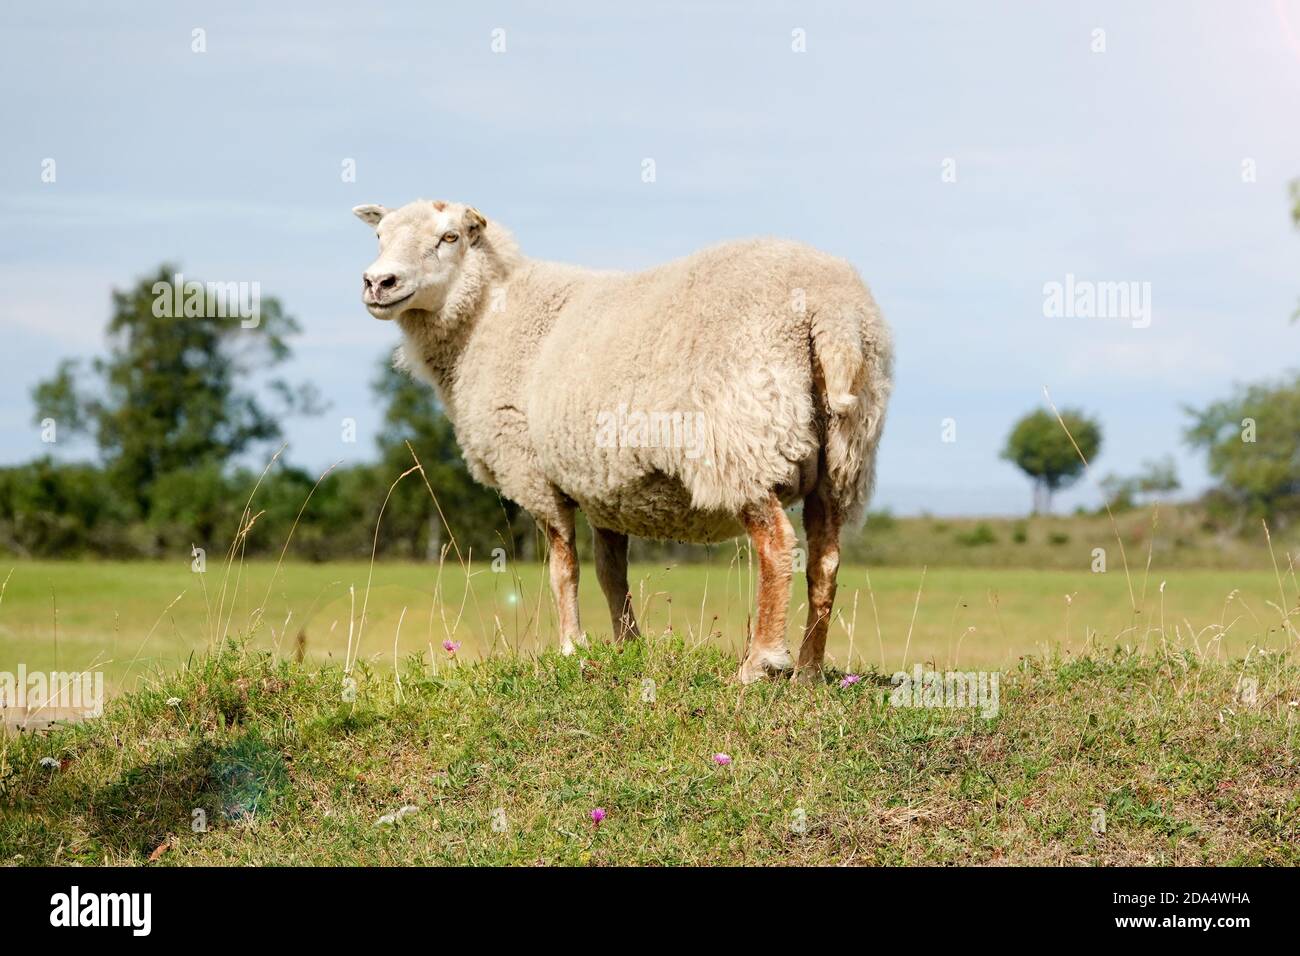 smiling sheep standing at sunlight. Summertime in Farmland. View of a Woolly Sheep in a Green forest Field. Wild animial with horns - sheep portrait Stock Photo